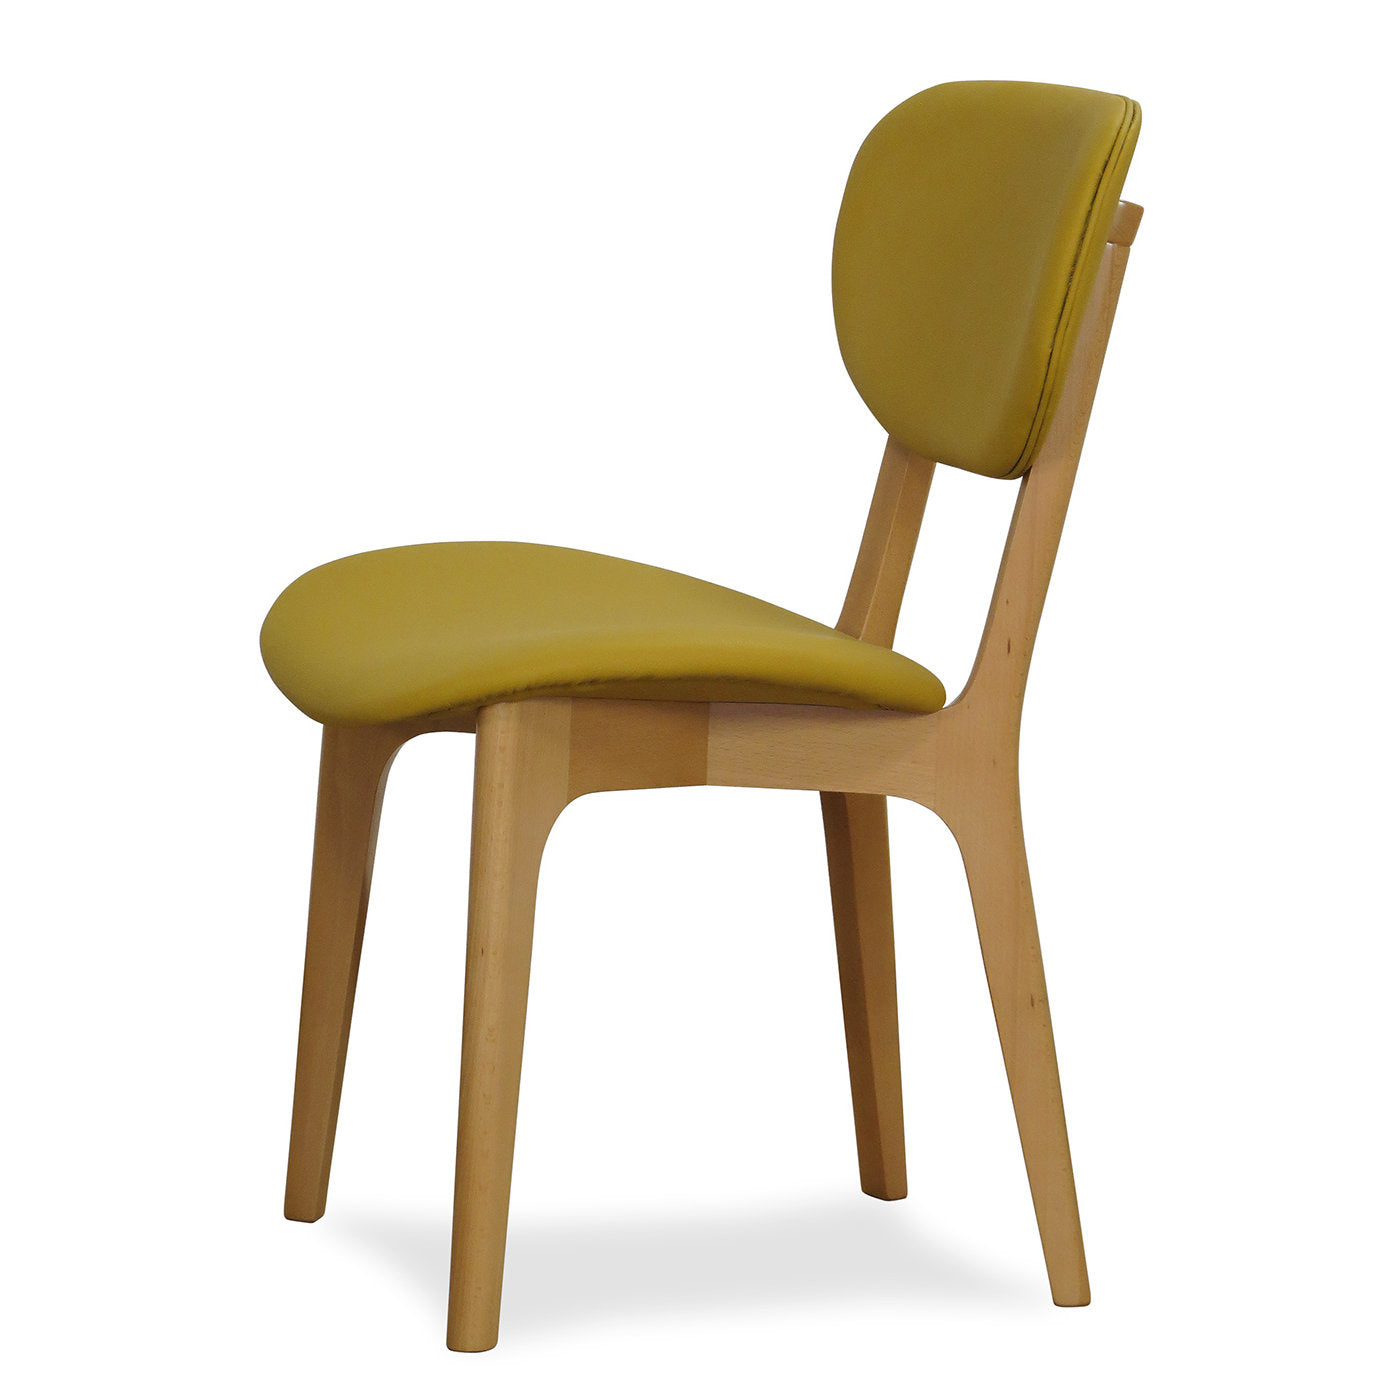 Cozy Set of 2 Mustard Chairs by Giacomo Cattani - Alternative view 1